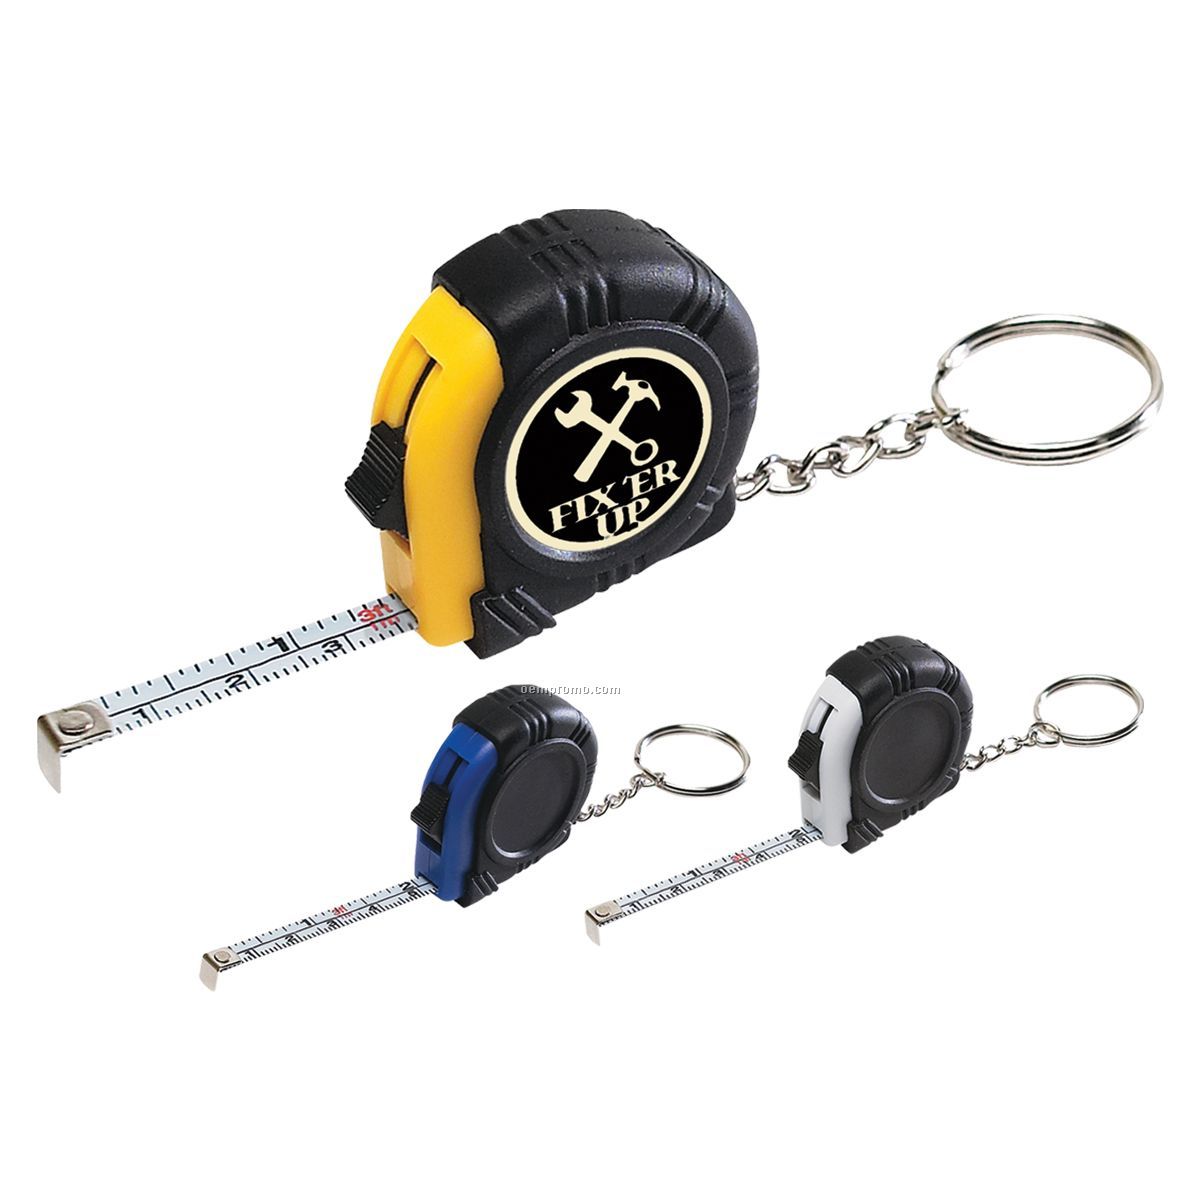 Rubber Tape Measure Key Tag W/ Laminated Label